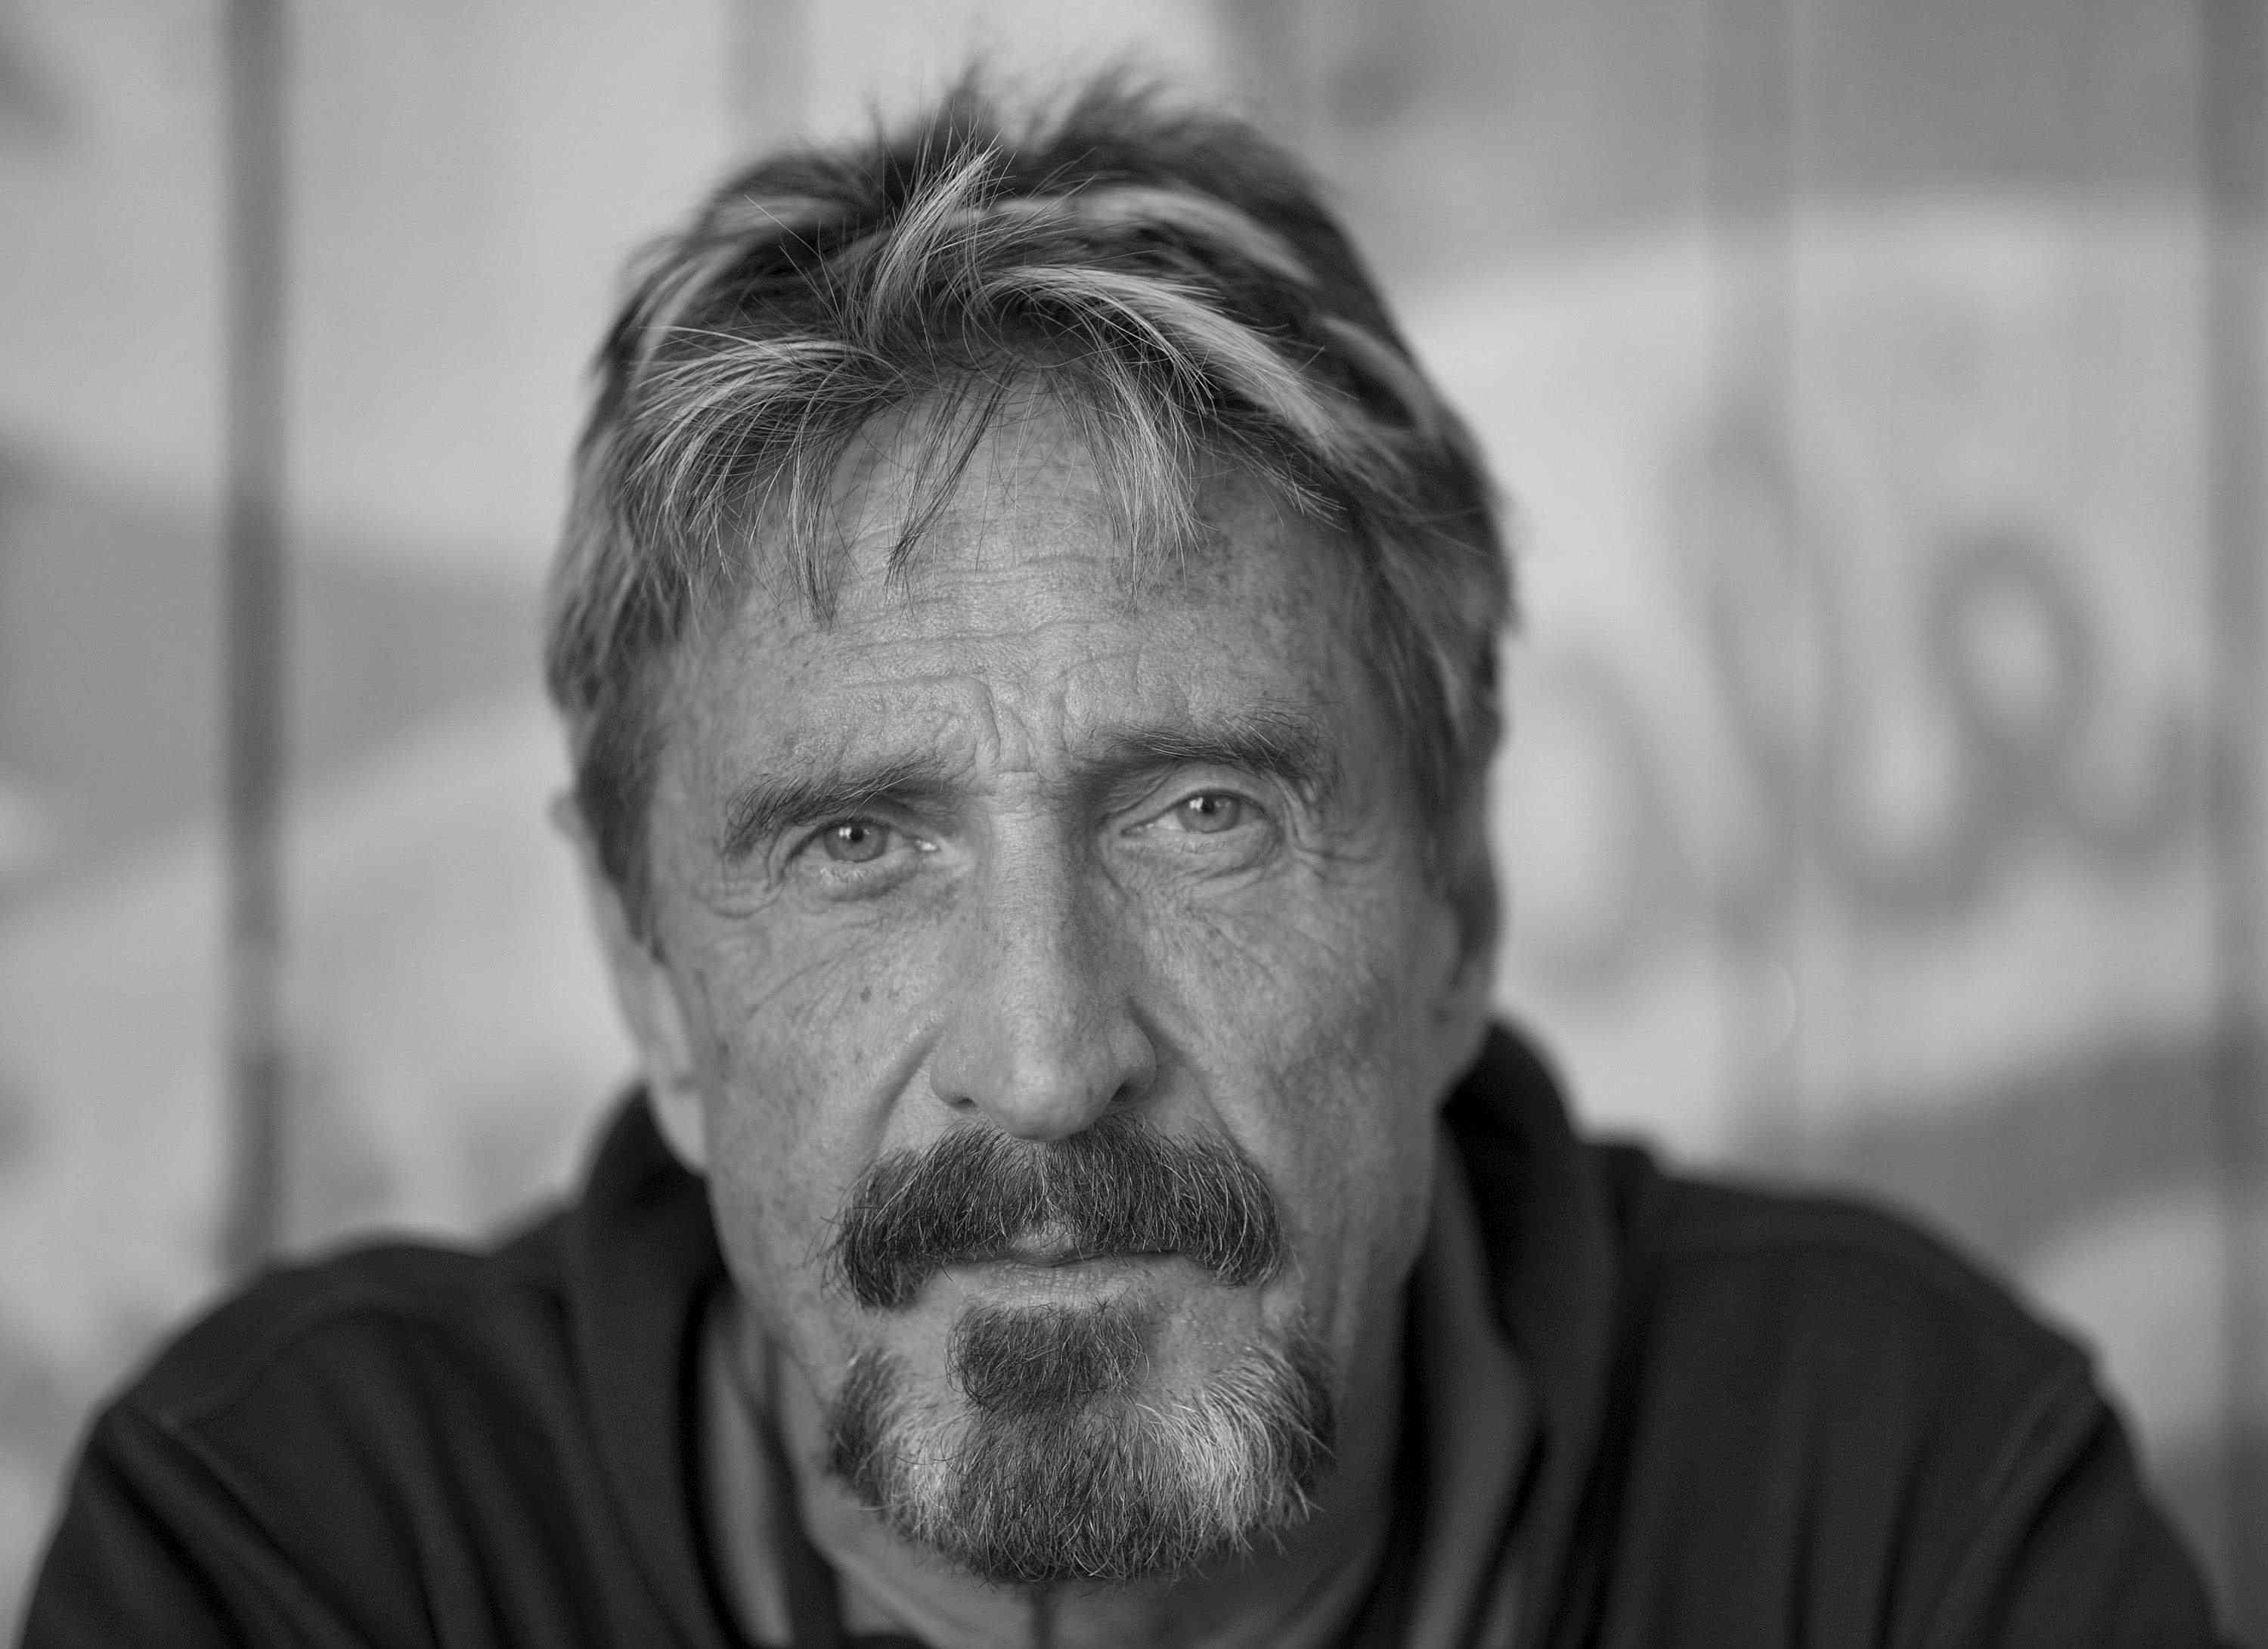 John McAfee: The greatest arrogance of humanity and the cure